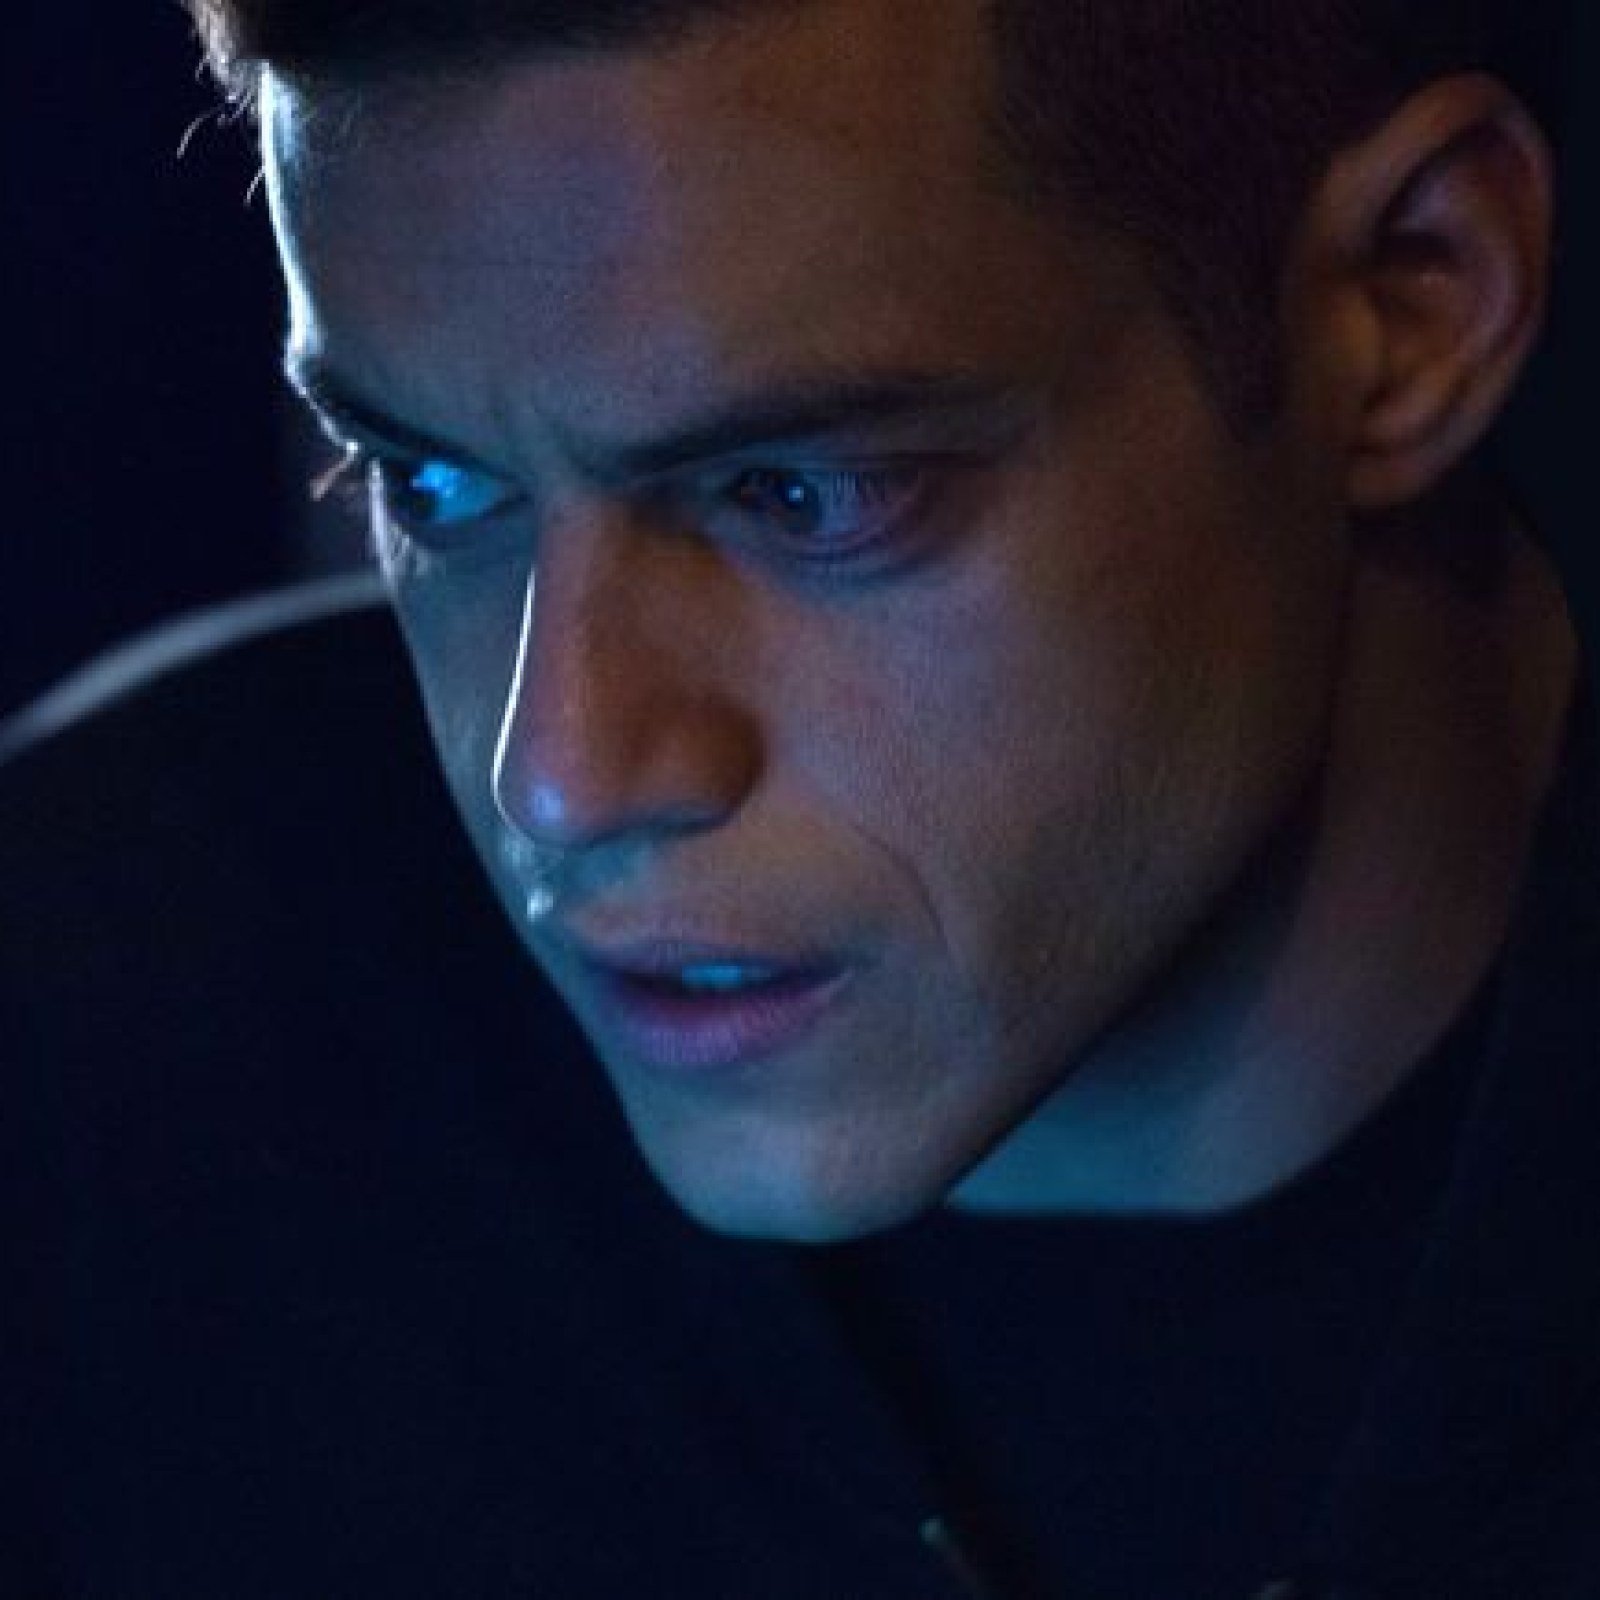 Omvendt Mistillid Ny mening Where to Watch 'Mr. Robot' Online Before Season 2: Sorry Netflix Users,  Season 1 Only On Amazon Prime